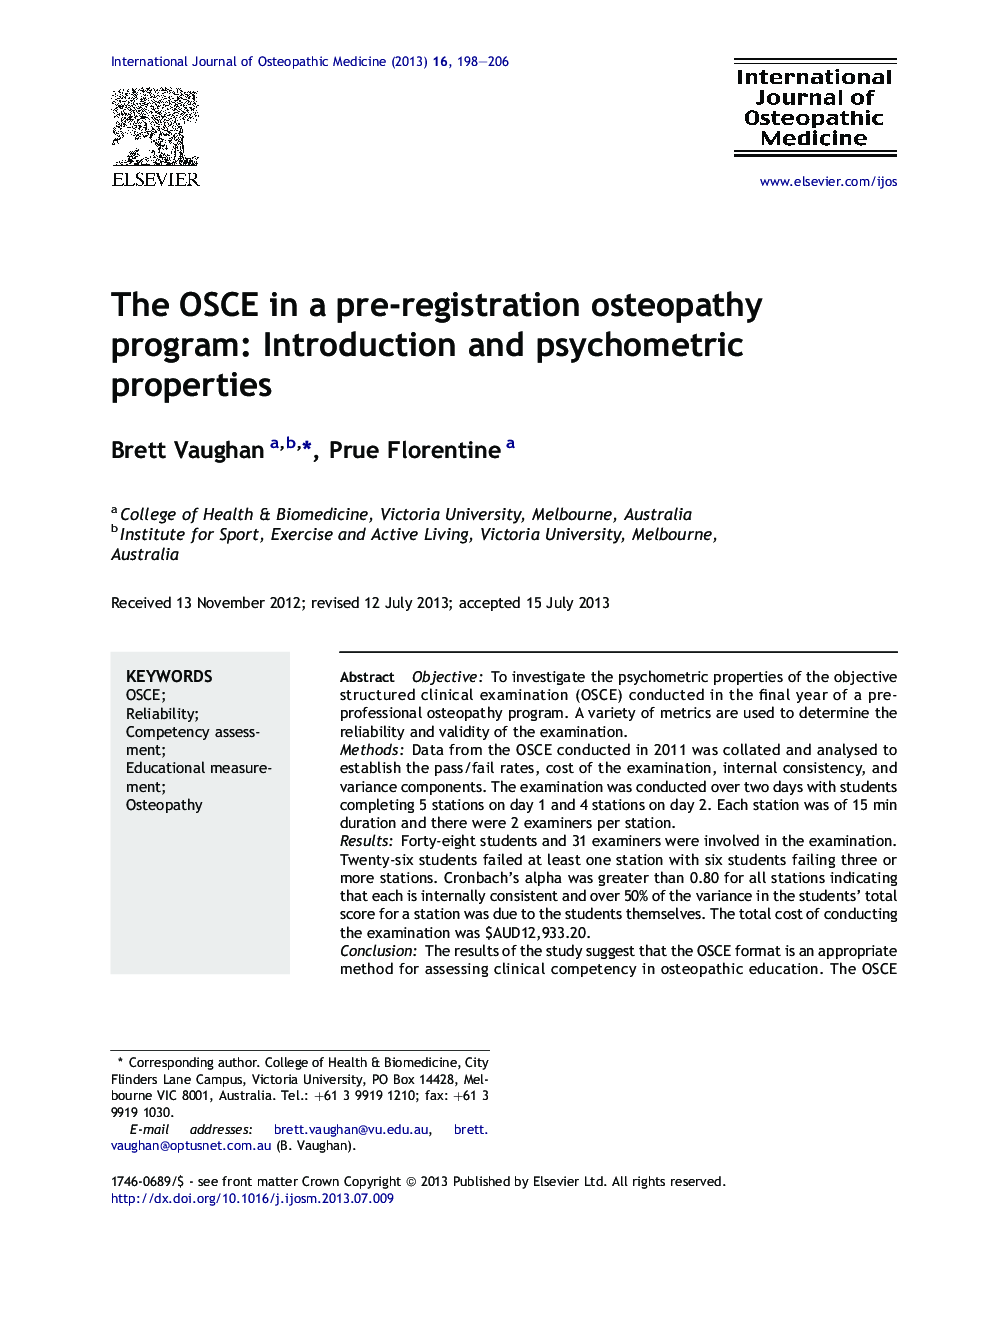 The OSCE in a pre-registration osteopathy program: Introduction and psychometric properties